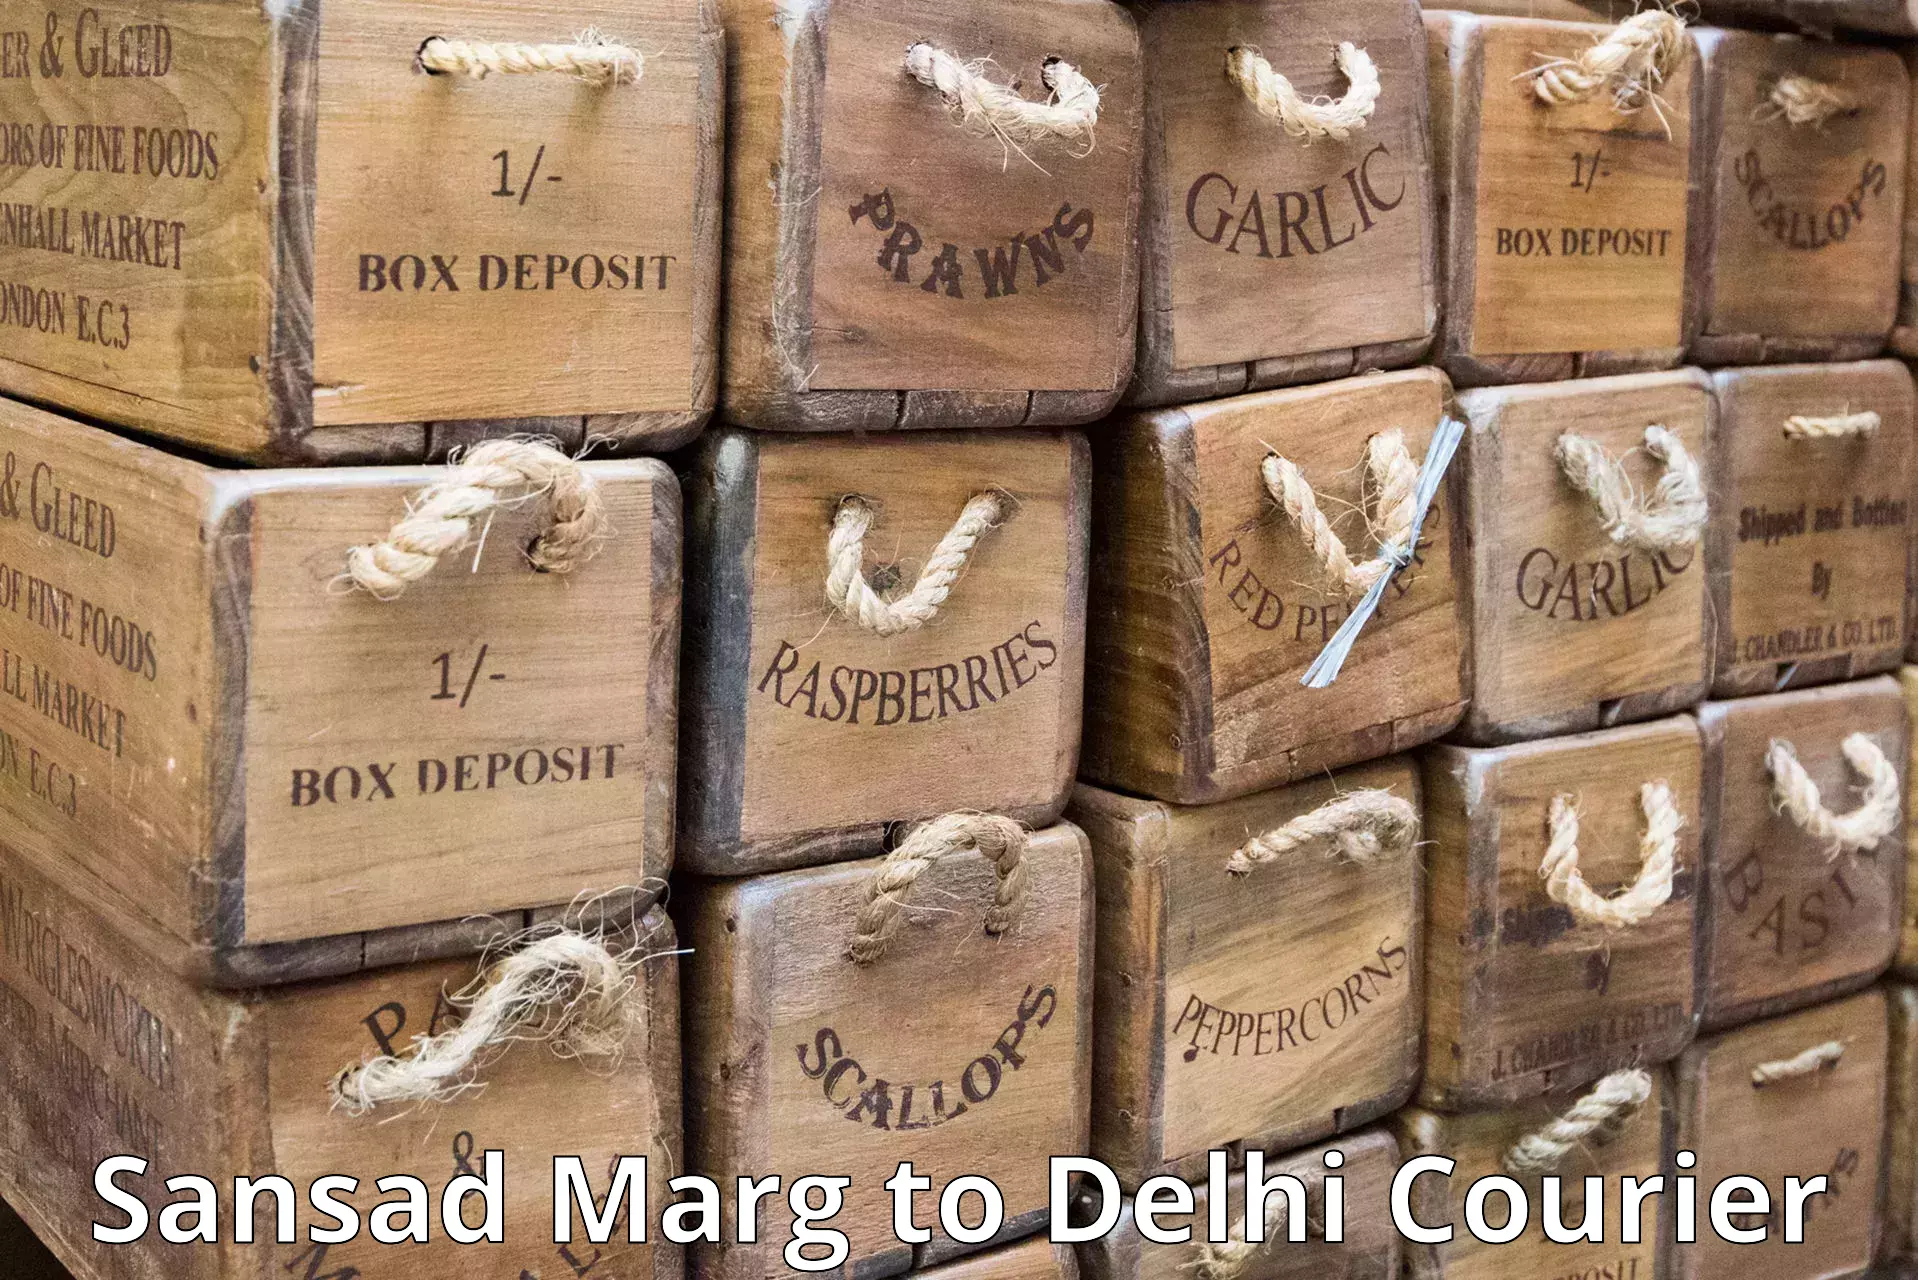 On-demand delivery in Sansad Marg to East Delhi